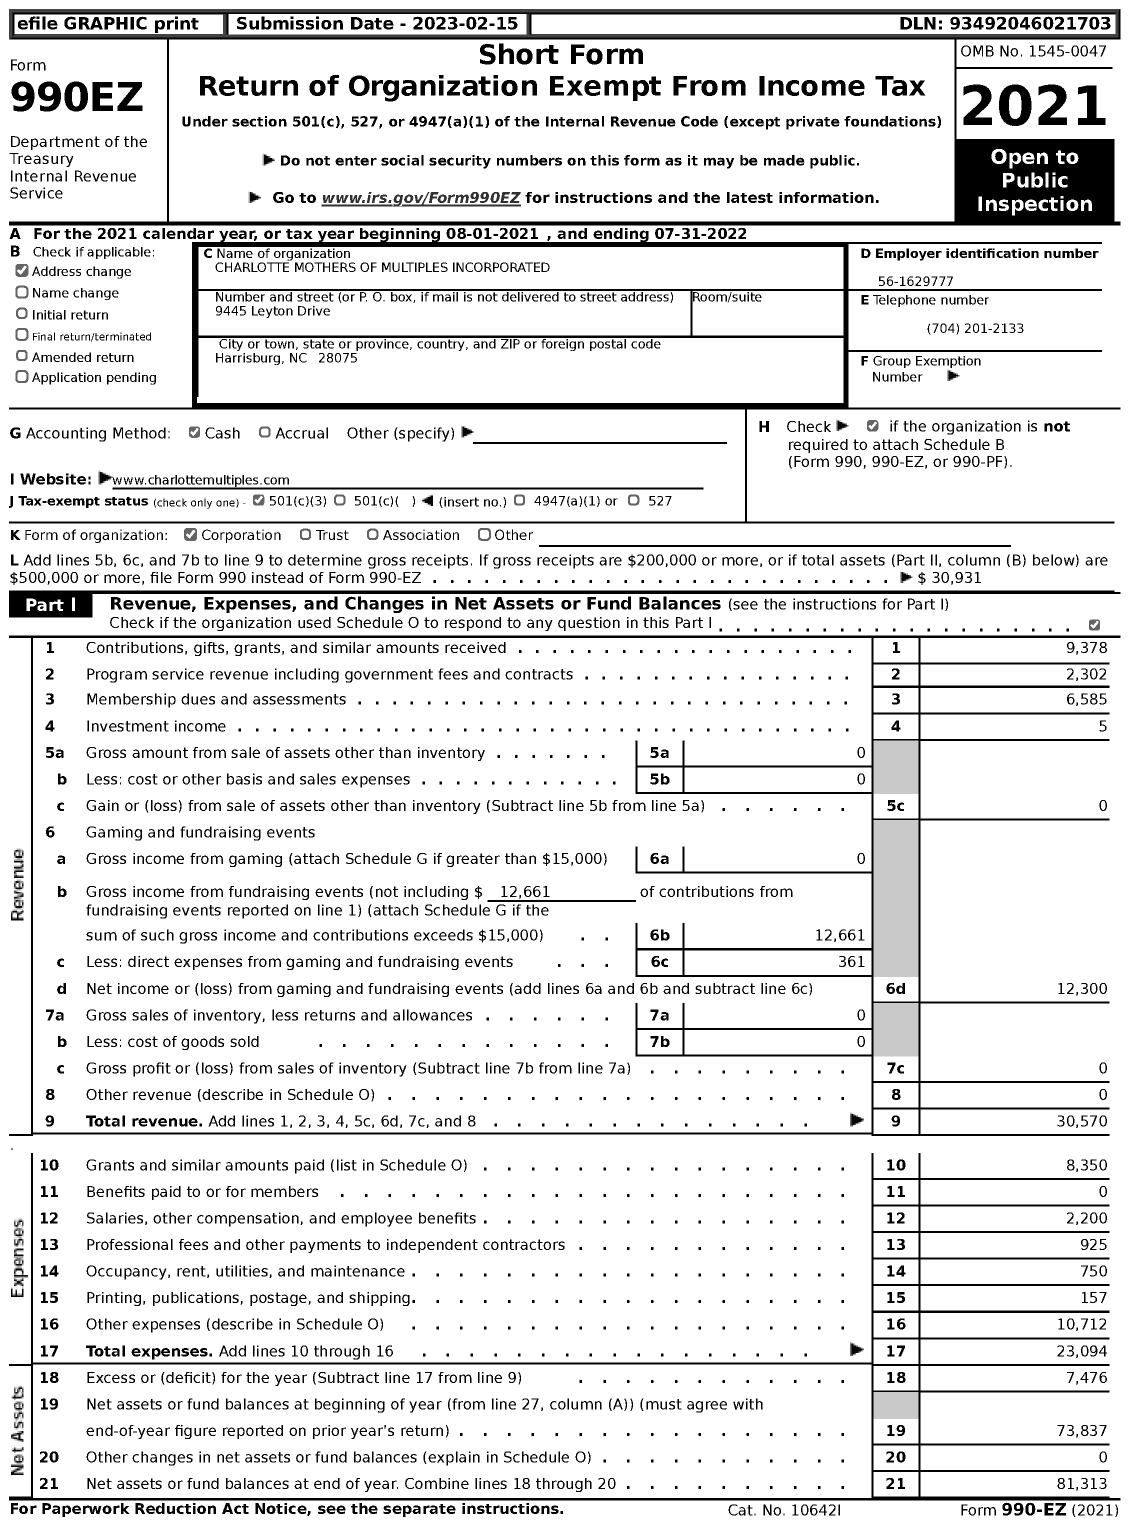 Image of first page of 2021 Form 990EZ for Charlotte Mothers of Multiples Incorporated